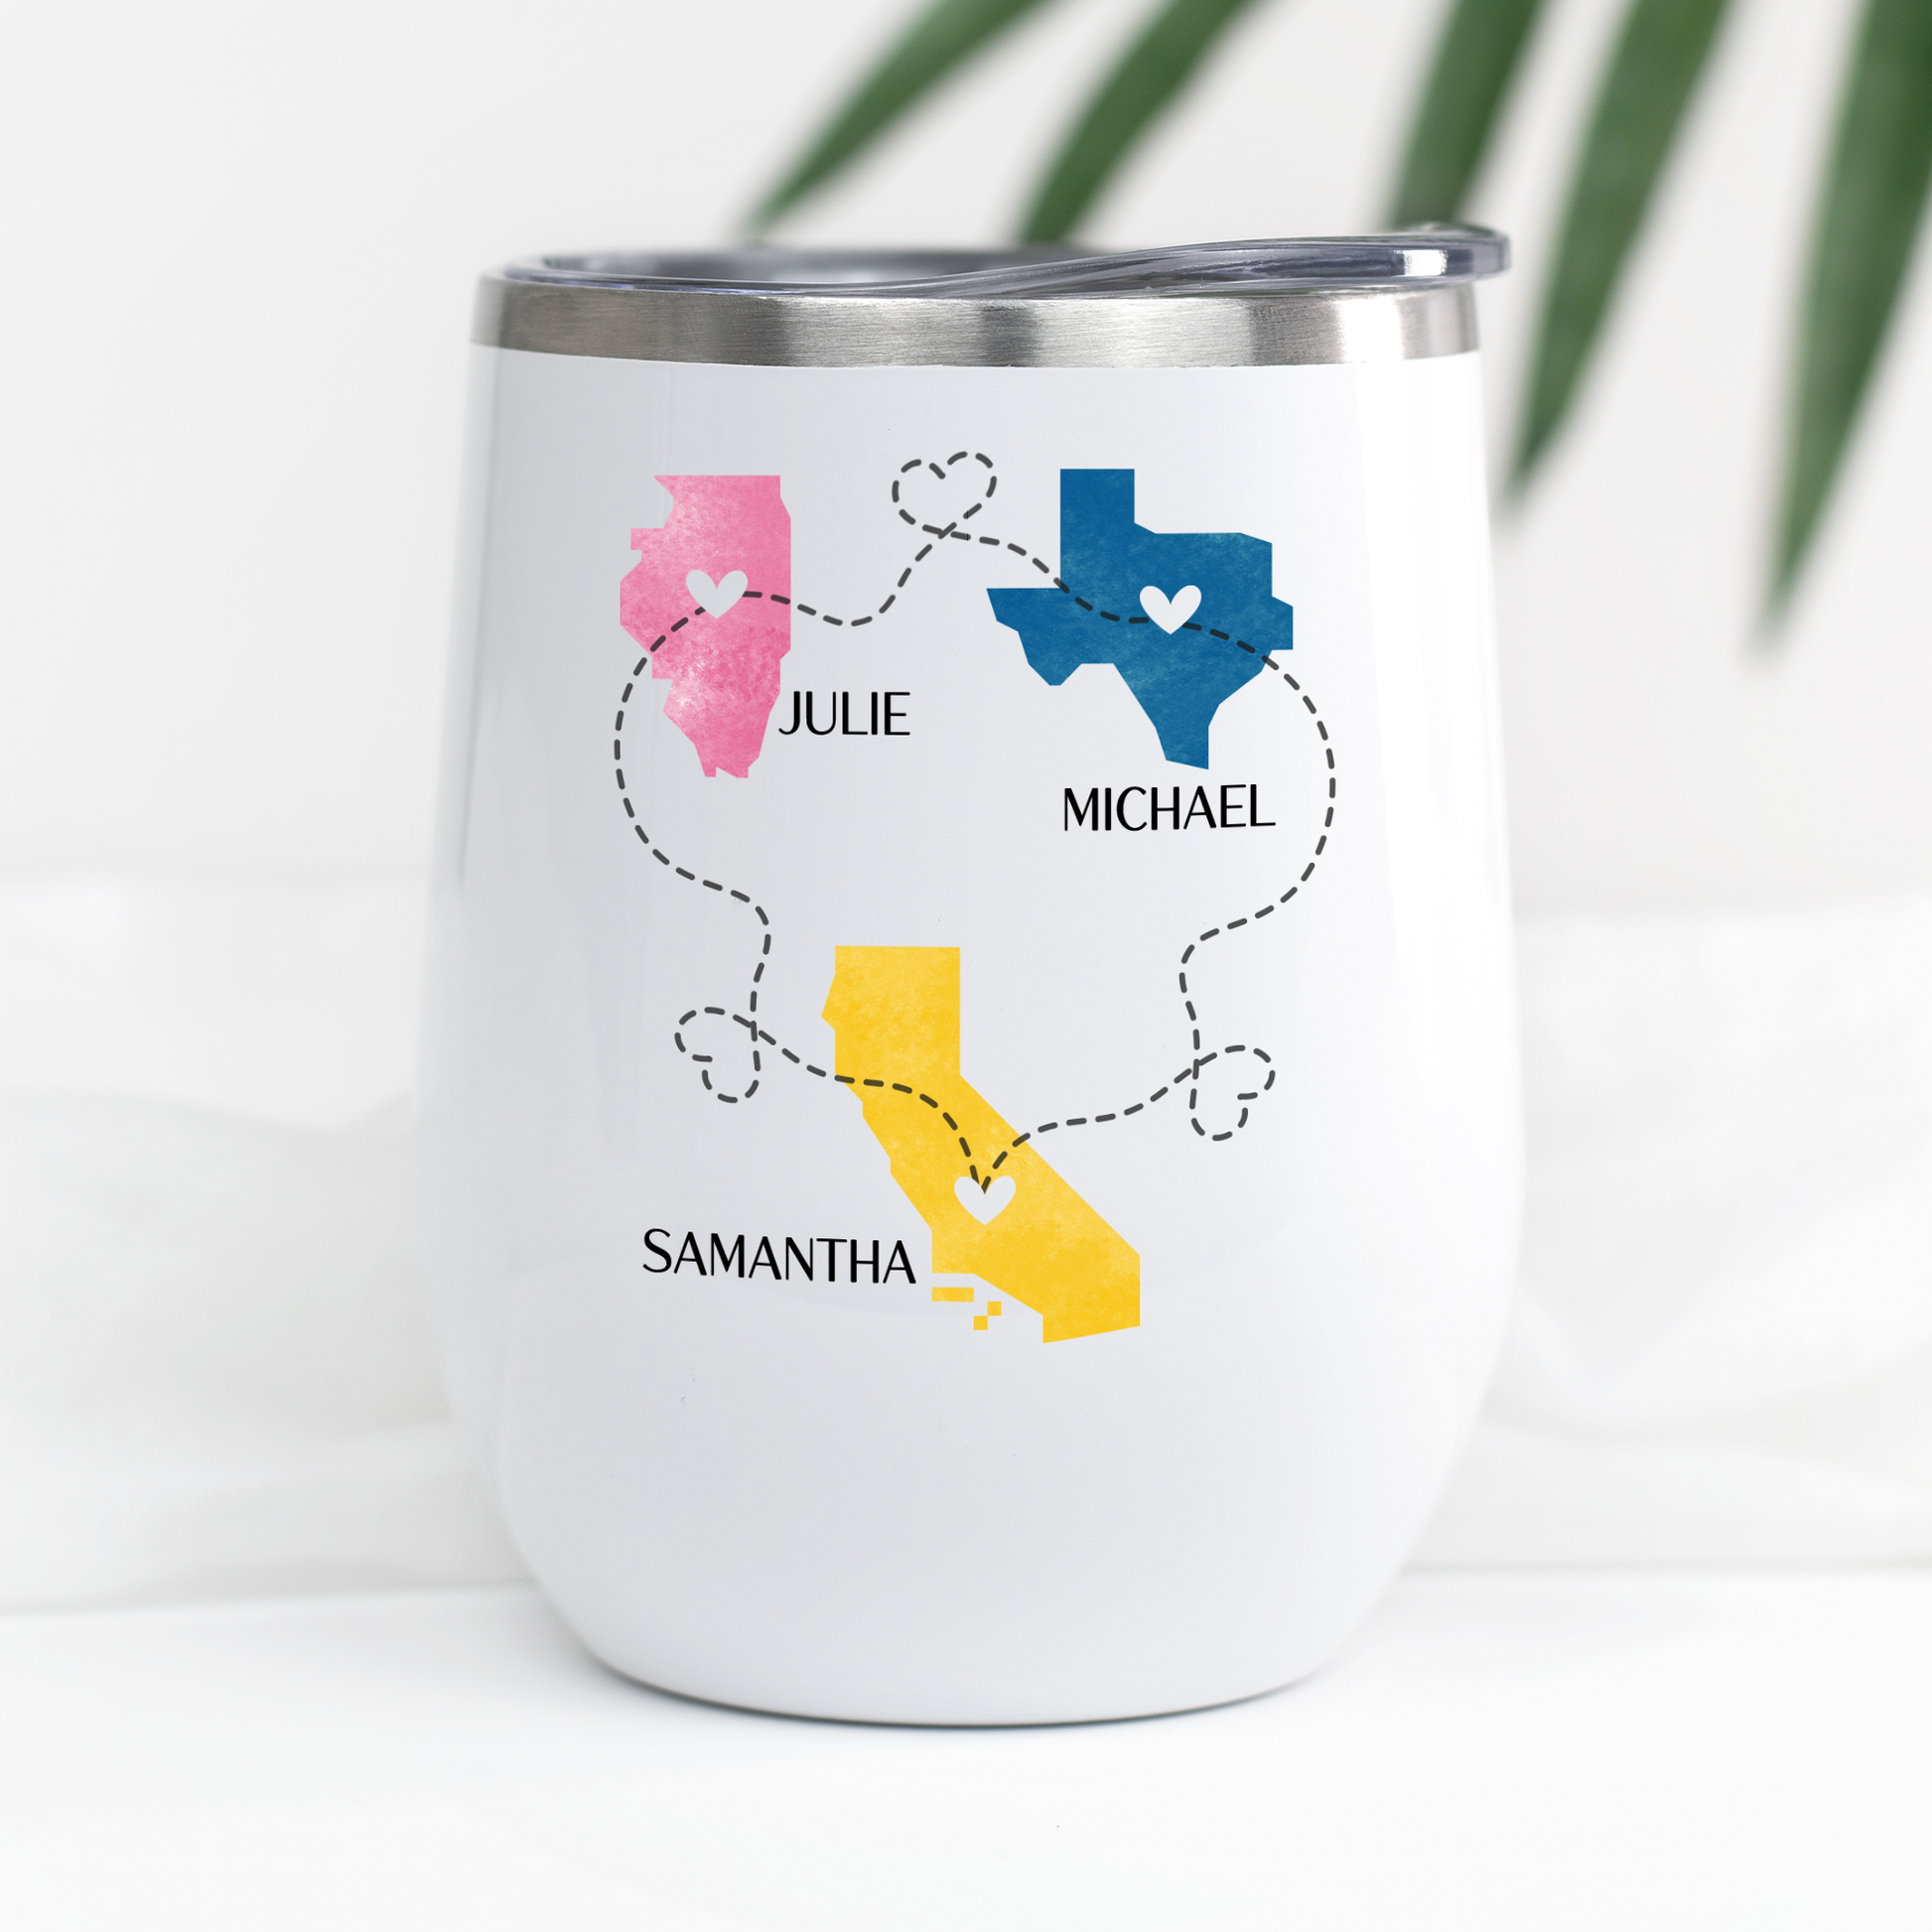 We'll Be Friends Until We're Old And Senile Wine Tumbler, Personalized Best Friend Gifts For Women, Funny Bff Birthday Bestie Christmas Gift